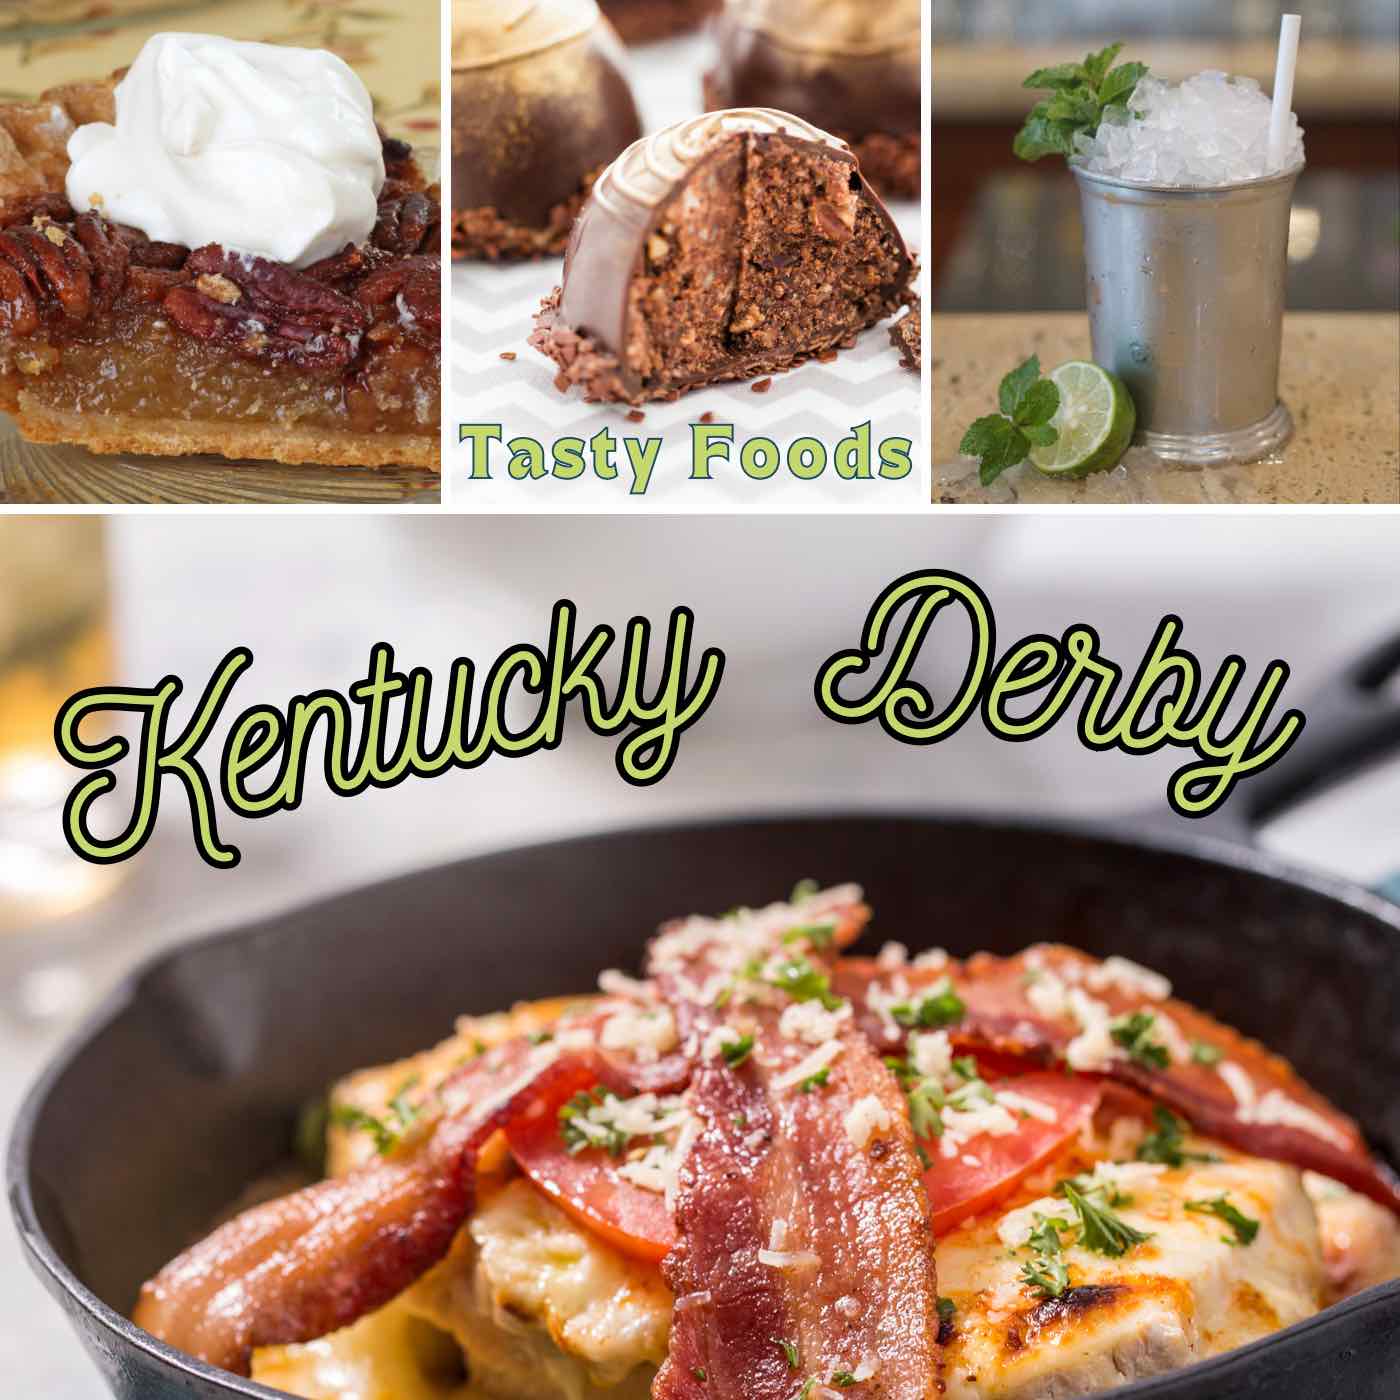 9 Best Foods for your Kentucky Derby Party